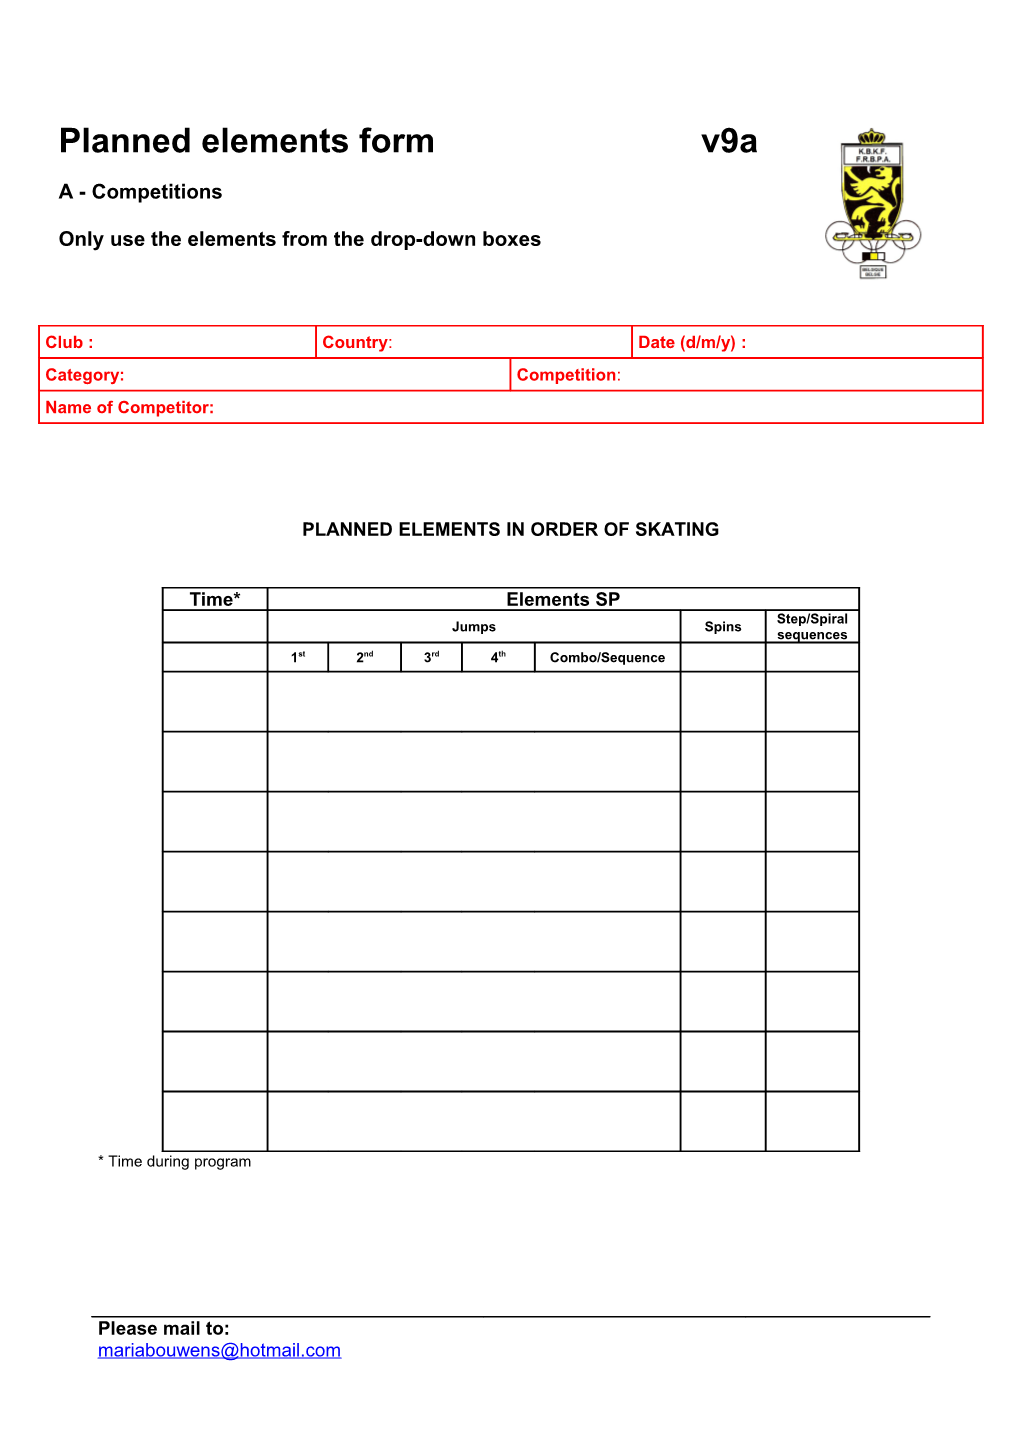 Please Return This Form Before Your First Practice to the Music Stand in the Main Rink